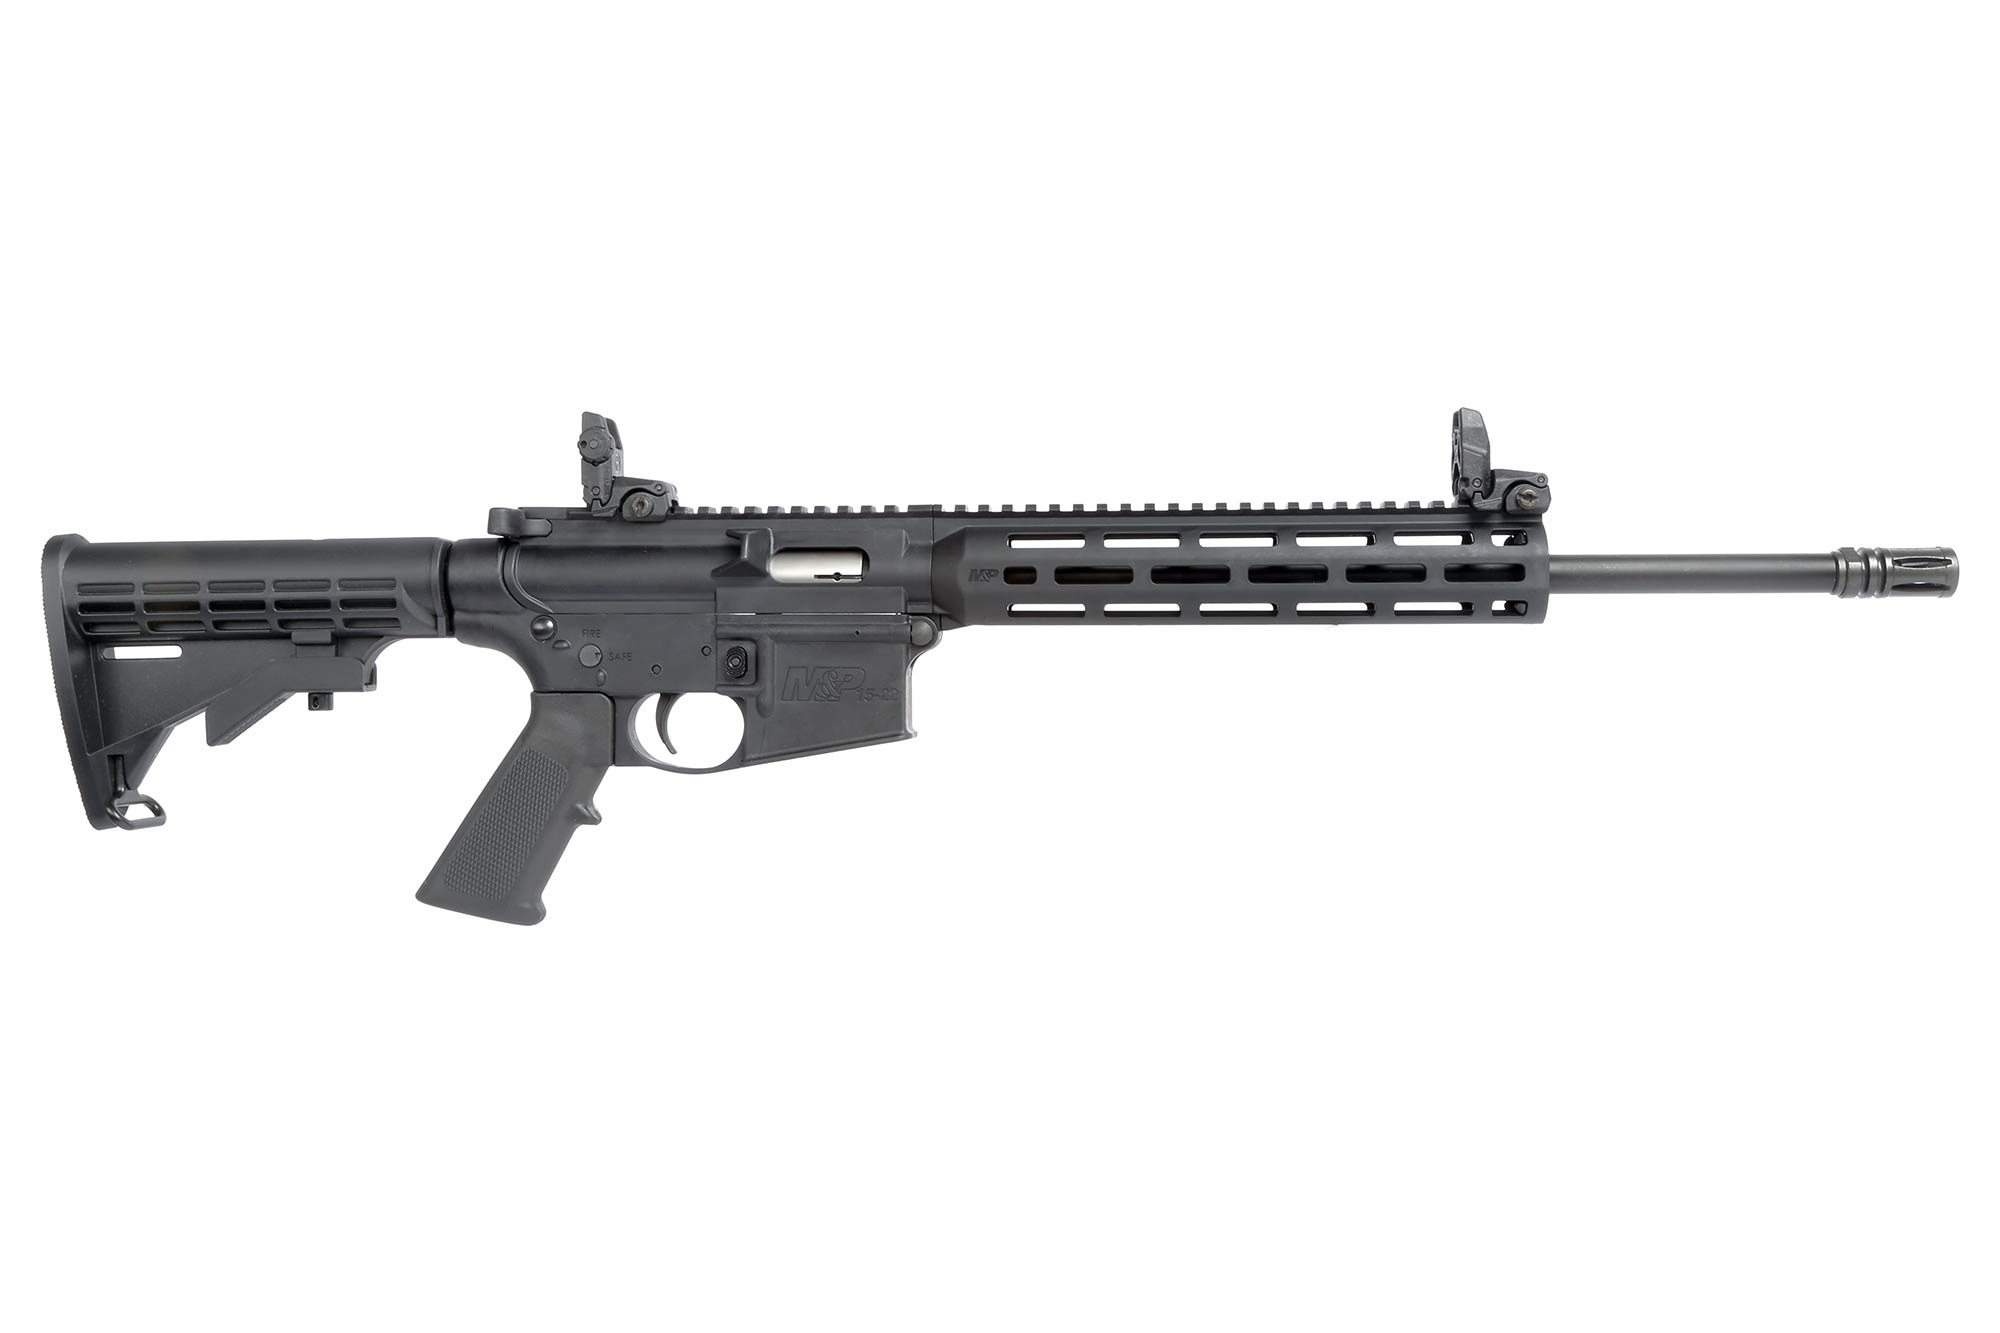 This is the second gen design with the much slimmer/modern m-lok handguard....